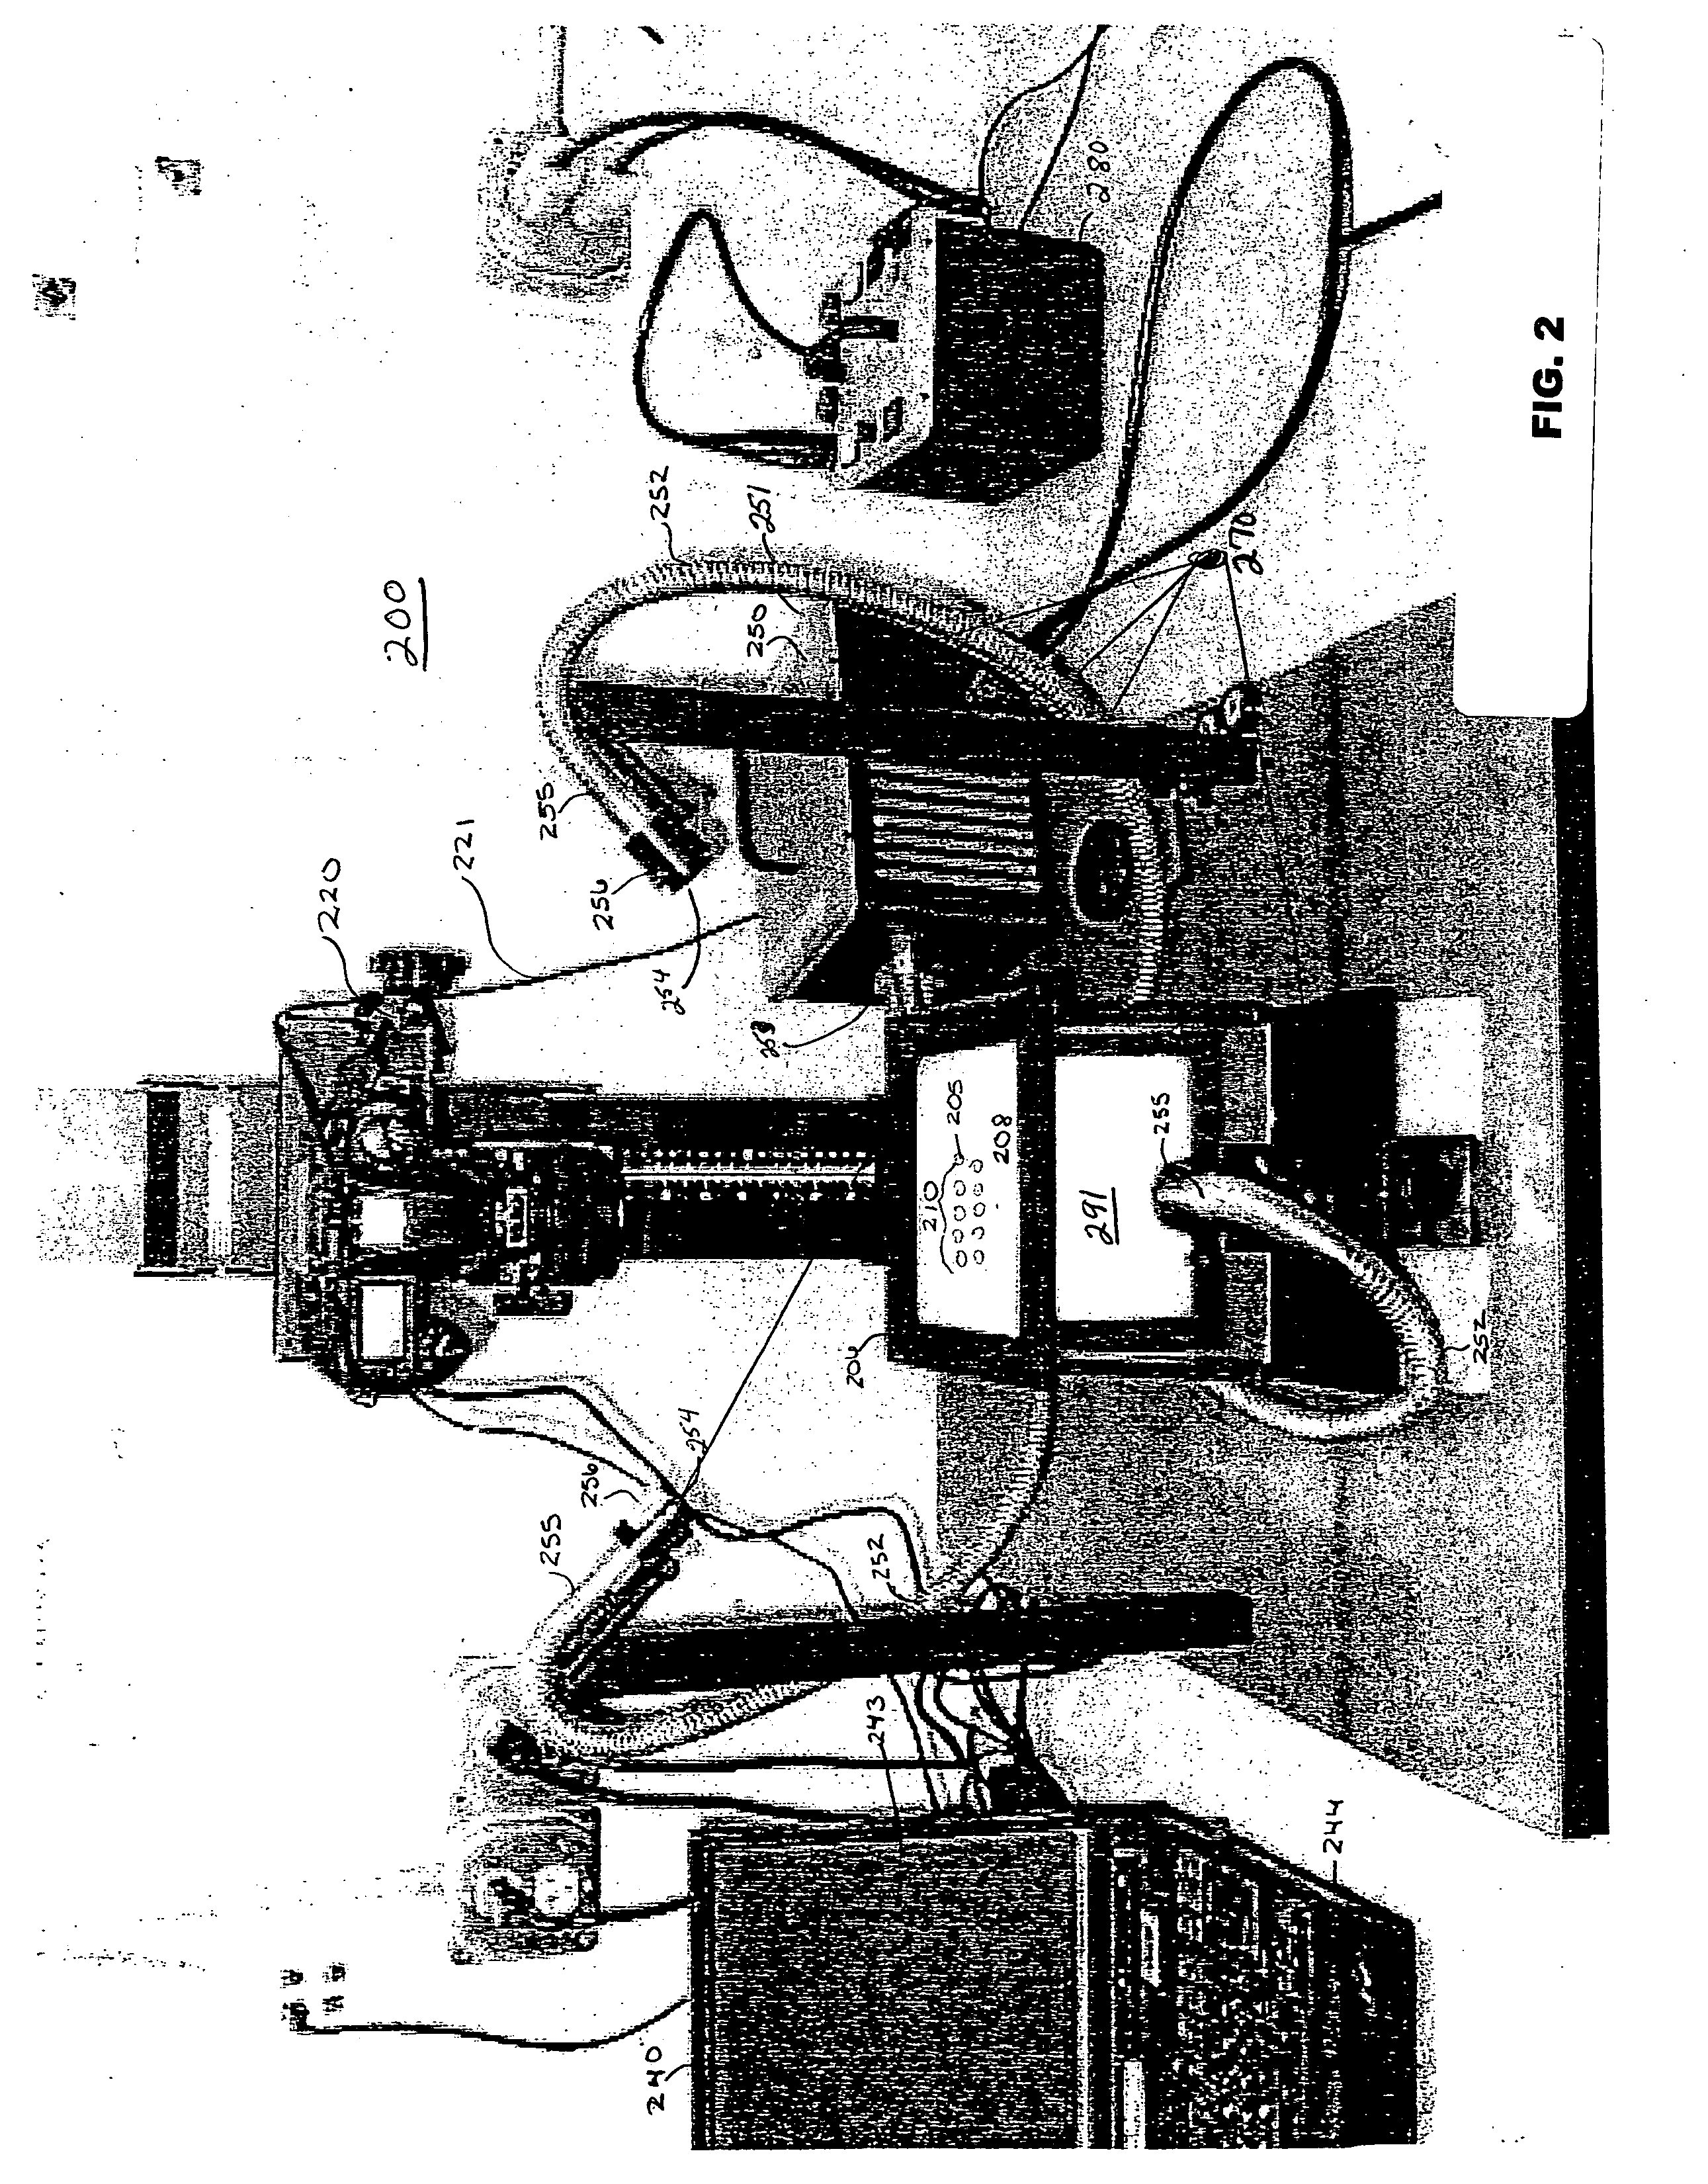 Method and apparatus for analyzing quality traits of grain or seed